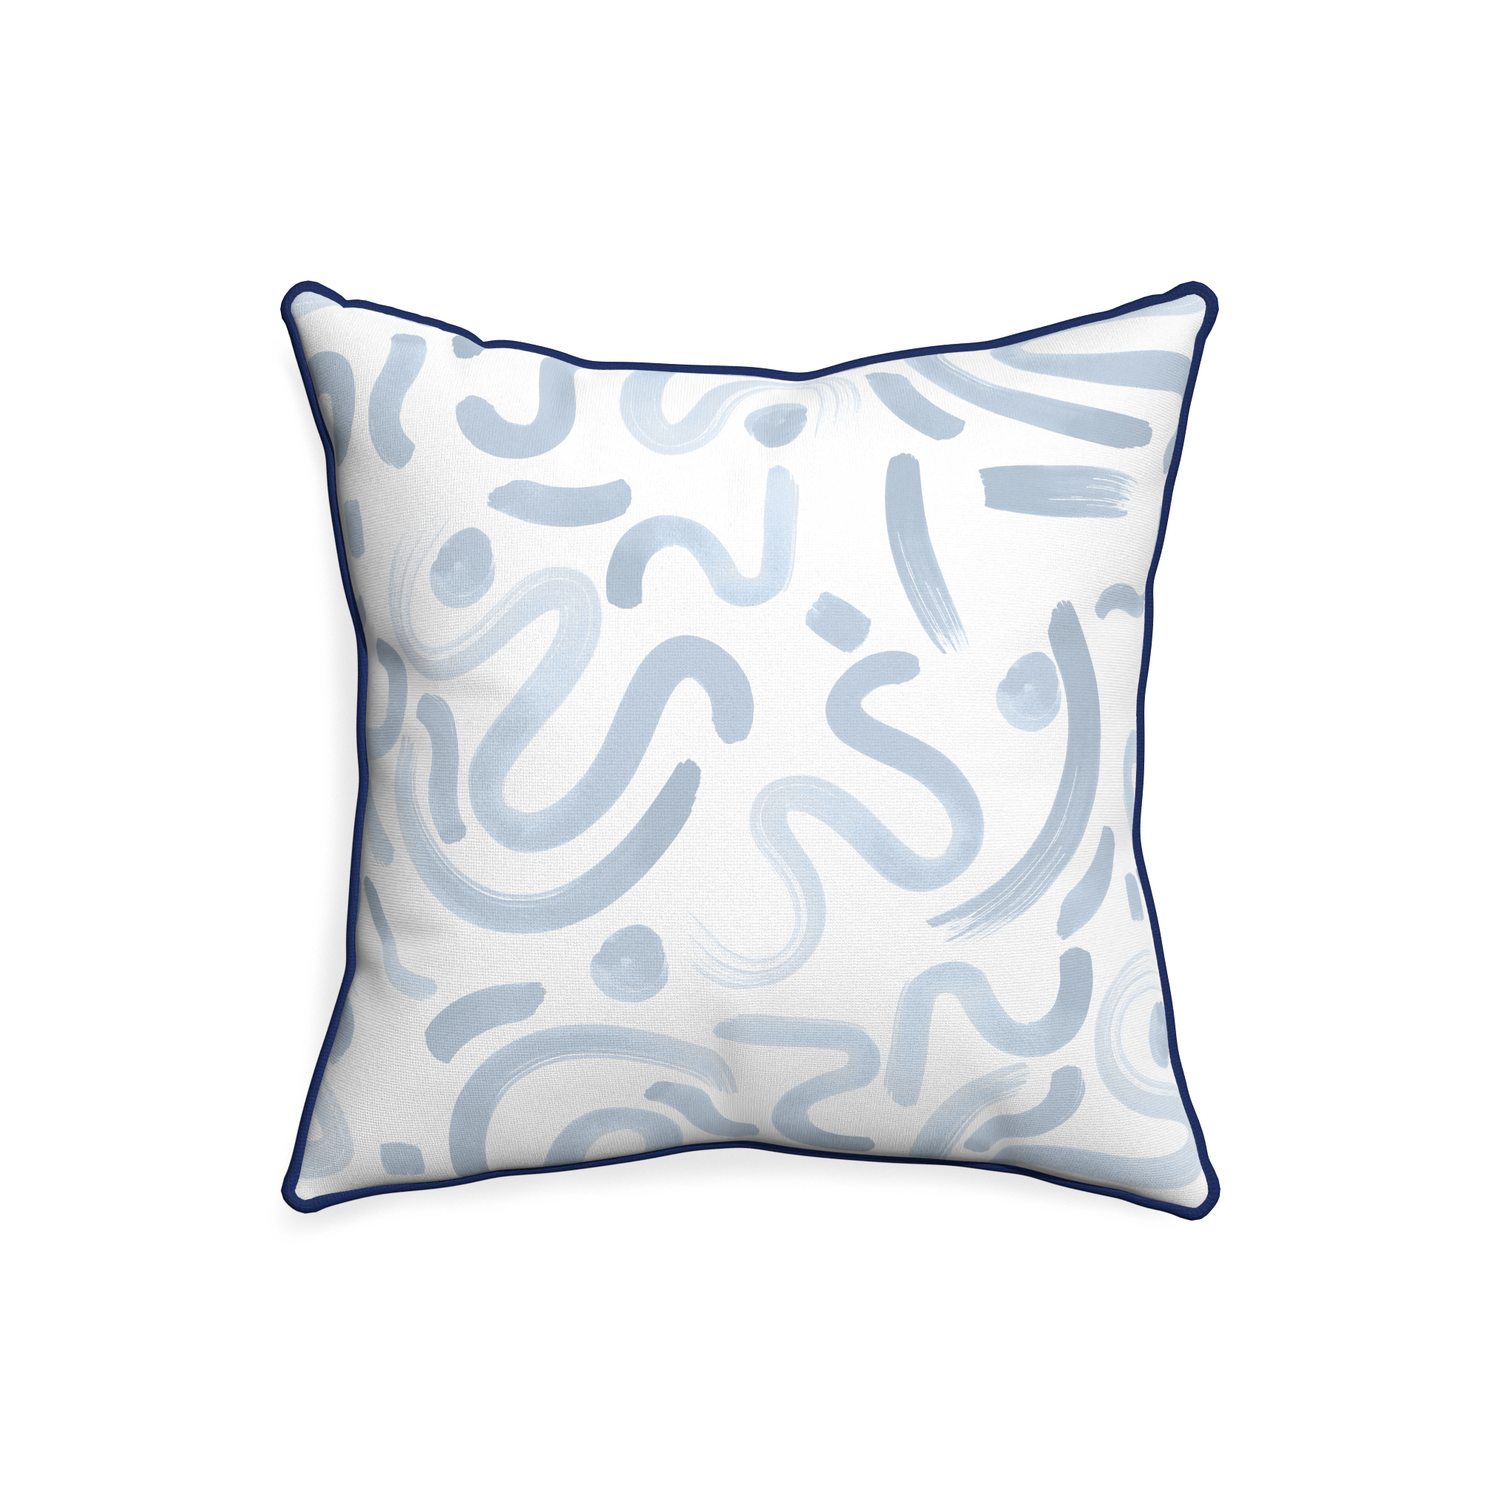 20-square hockney sky custom pillow with midnight piping on white background